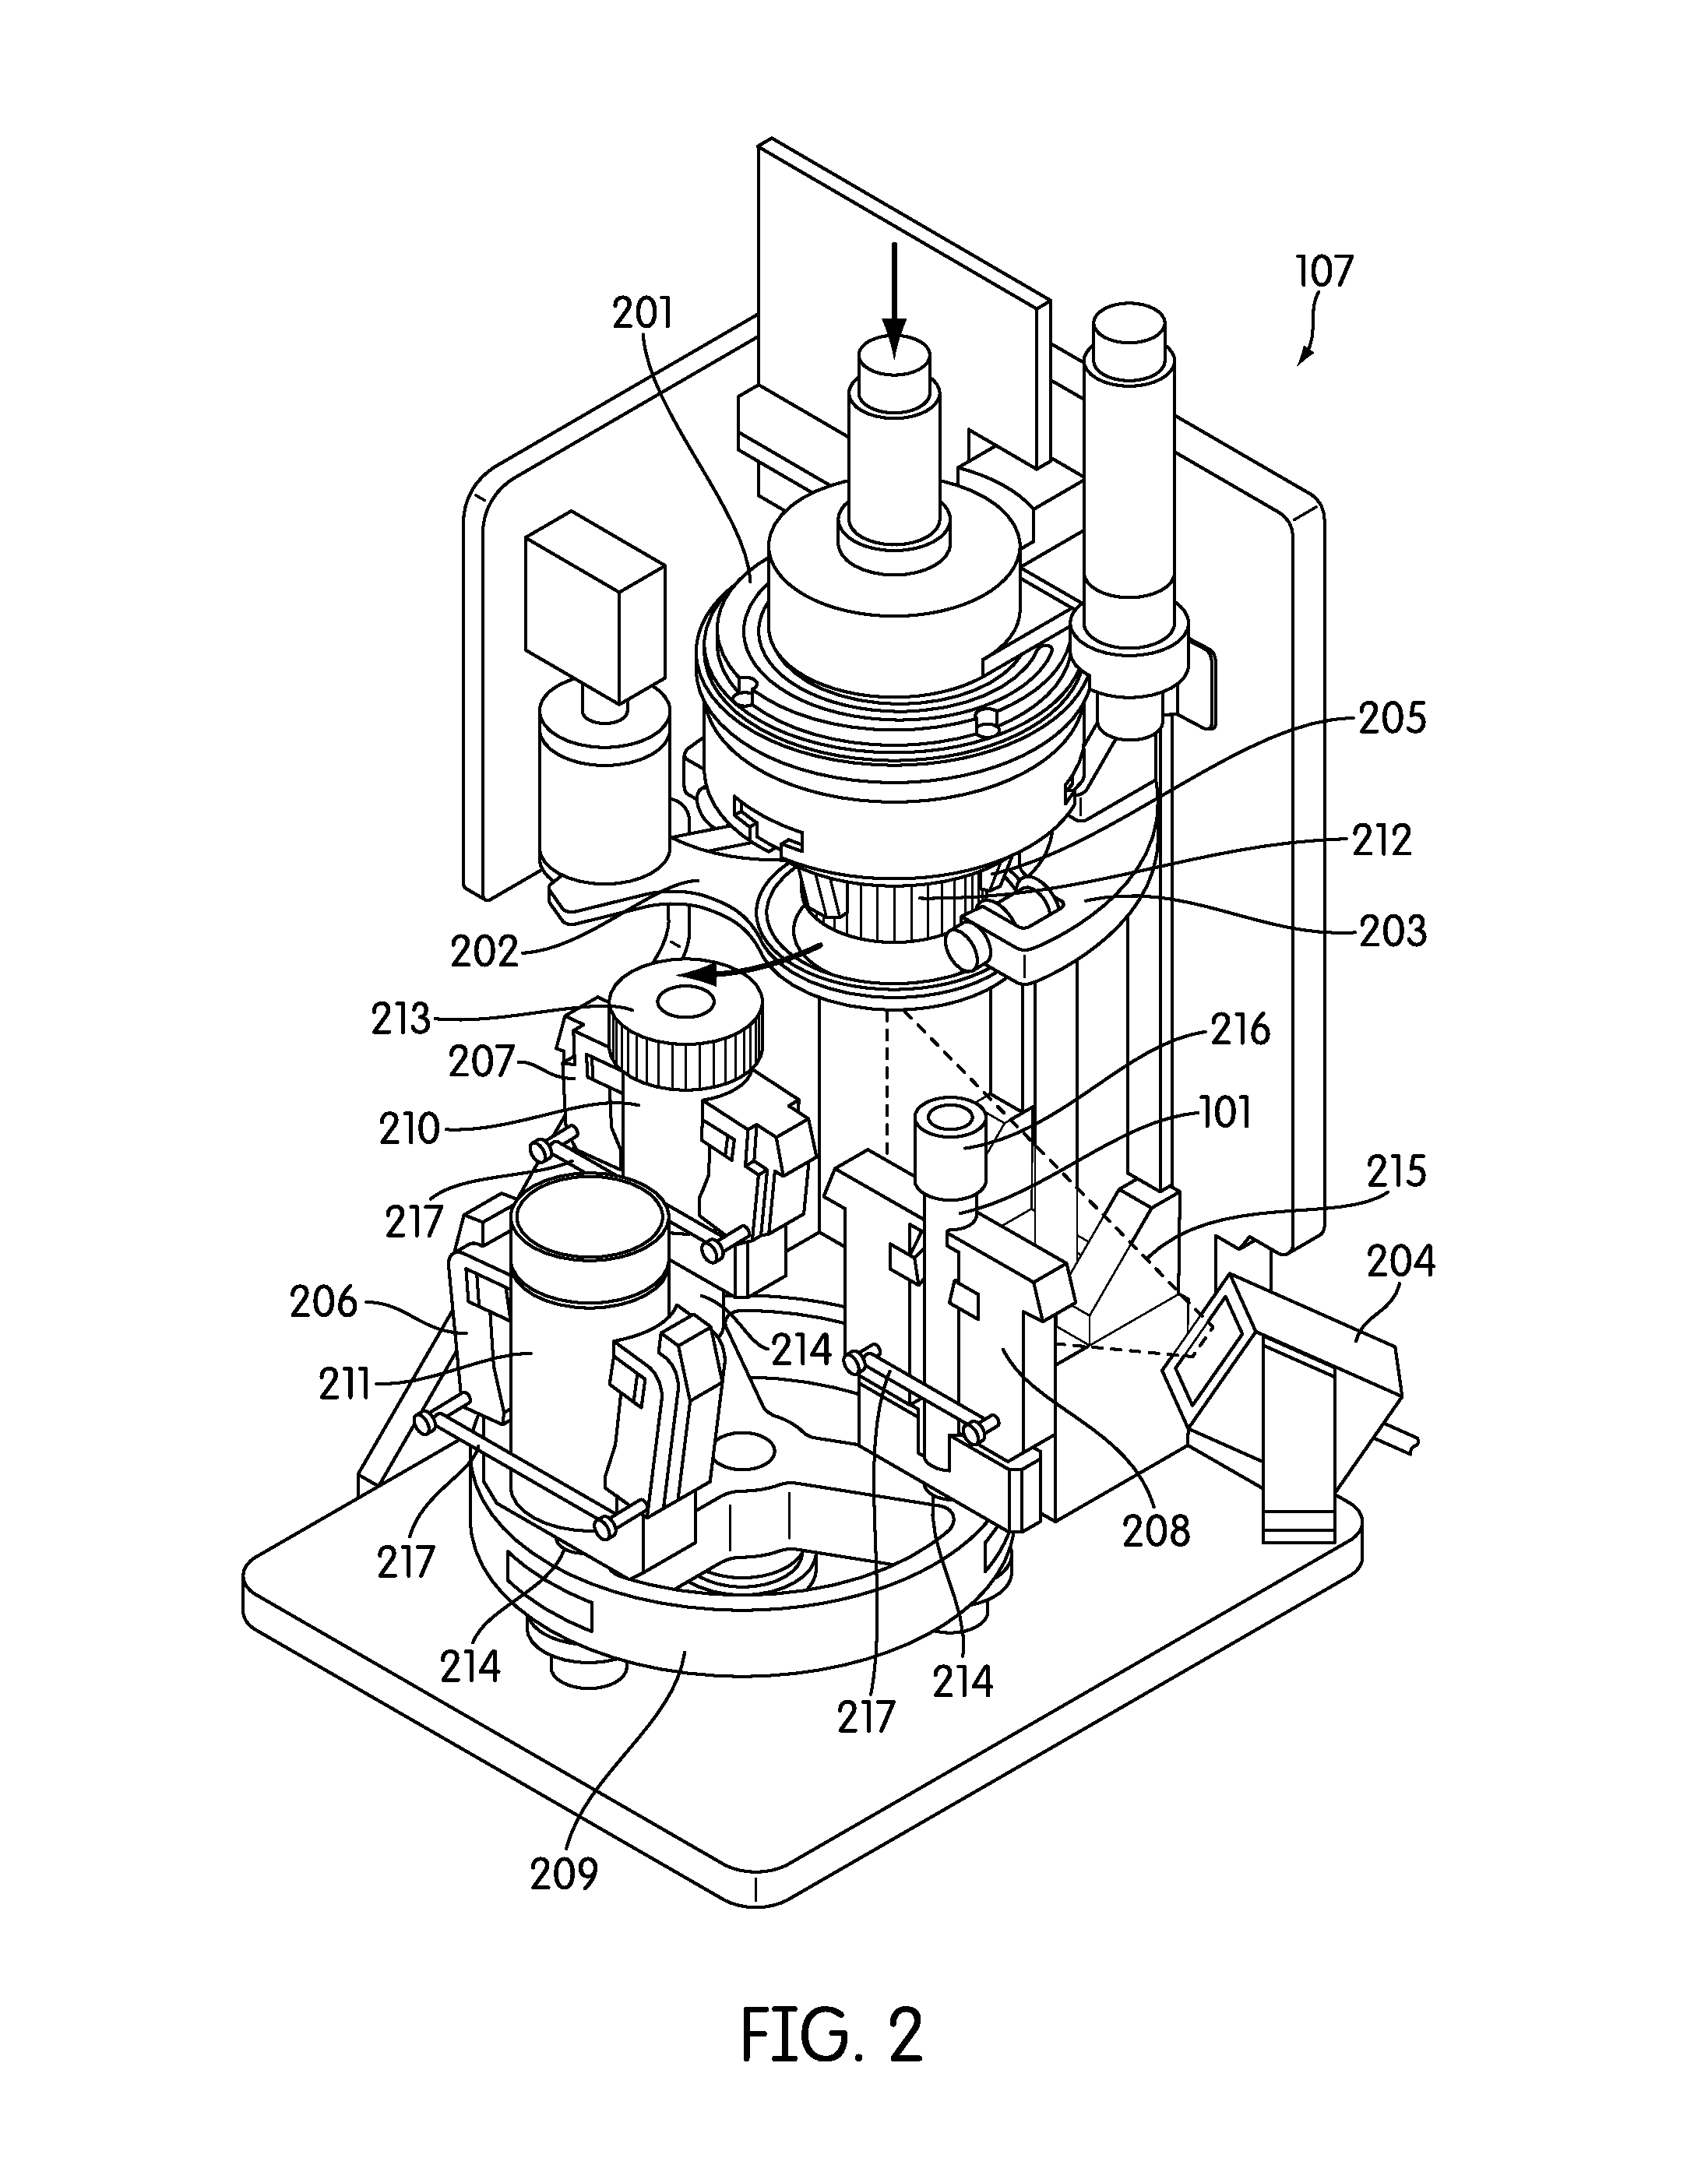 Automated sample handling instrumentation, systems, processes, and methods